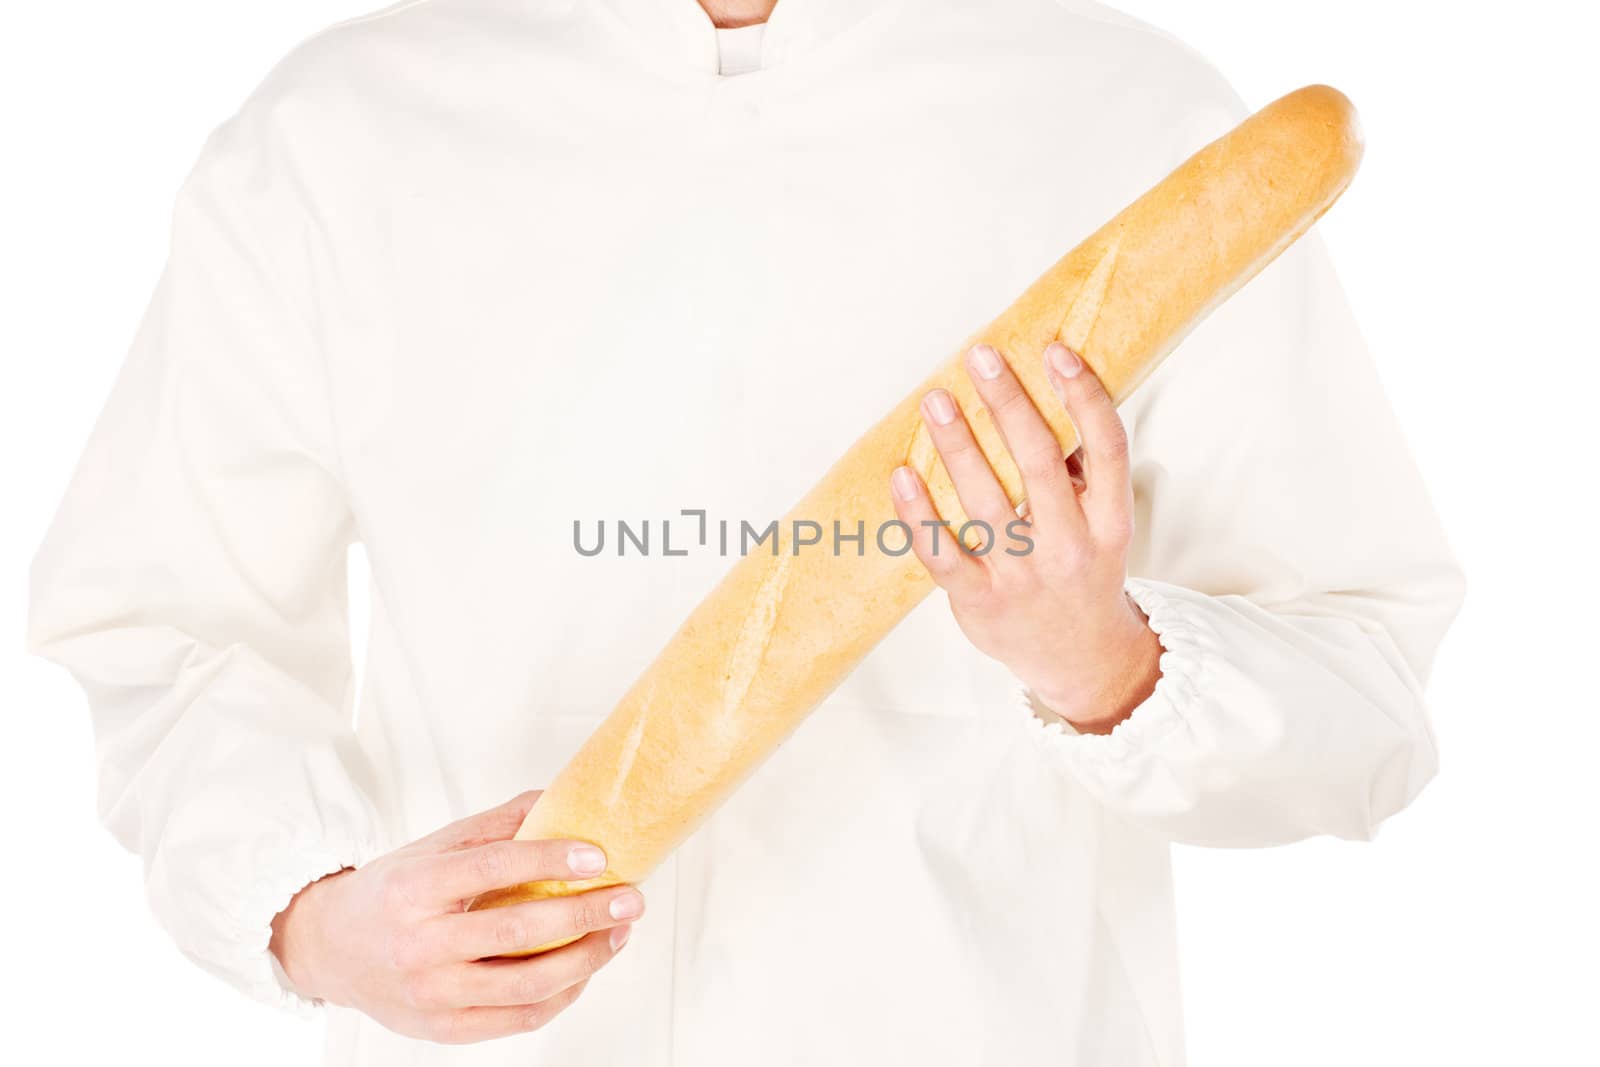 baguette in a hands of a backer by imarin